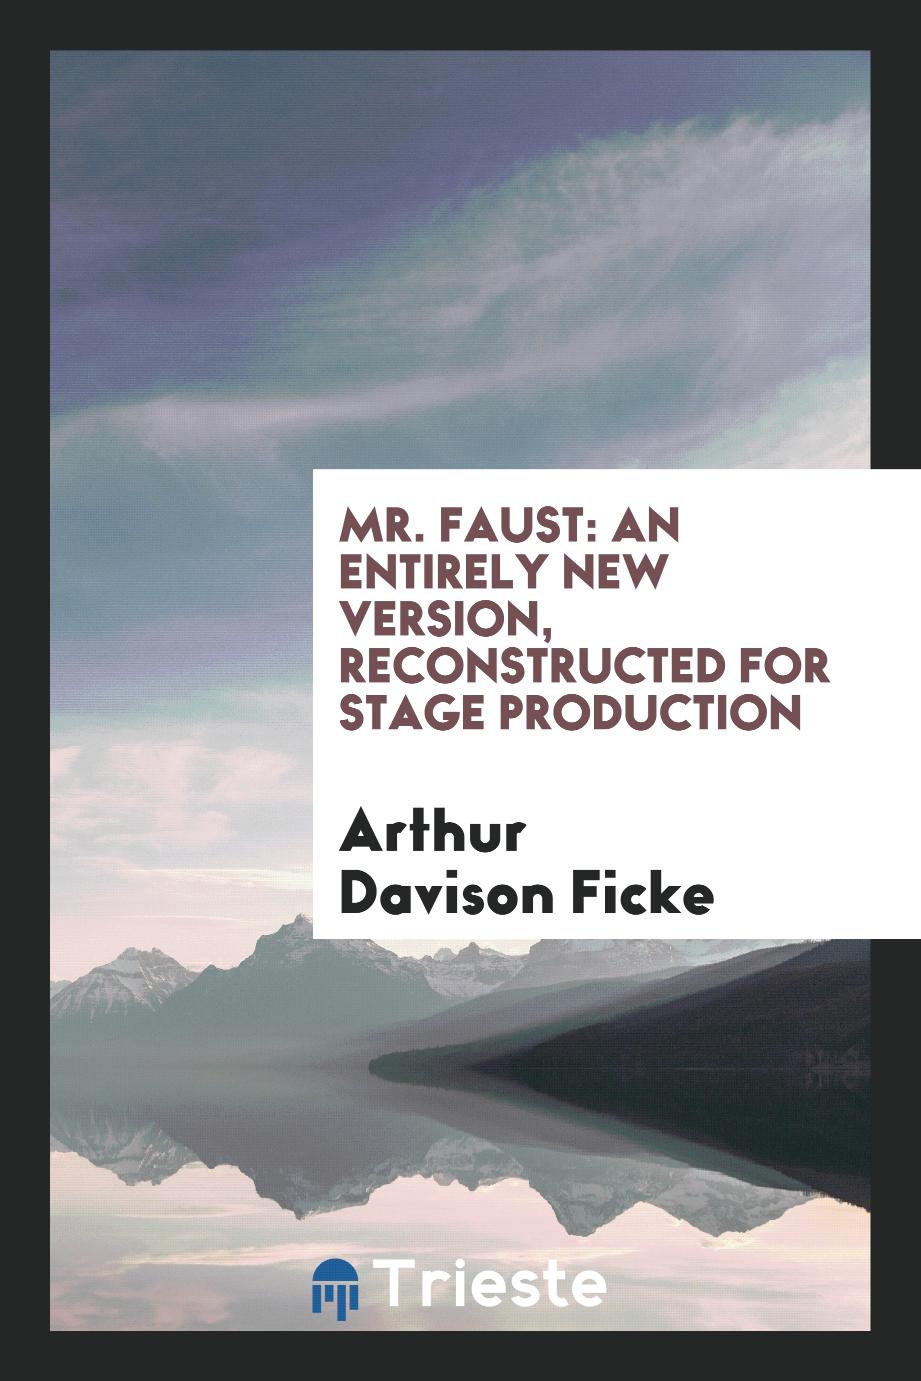 Mr. Faust: An Entirely New Version, Reconstructed for Stage Production